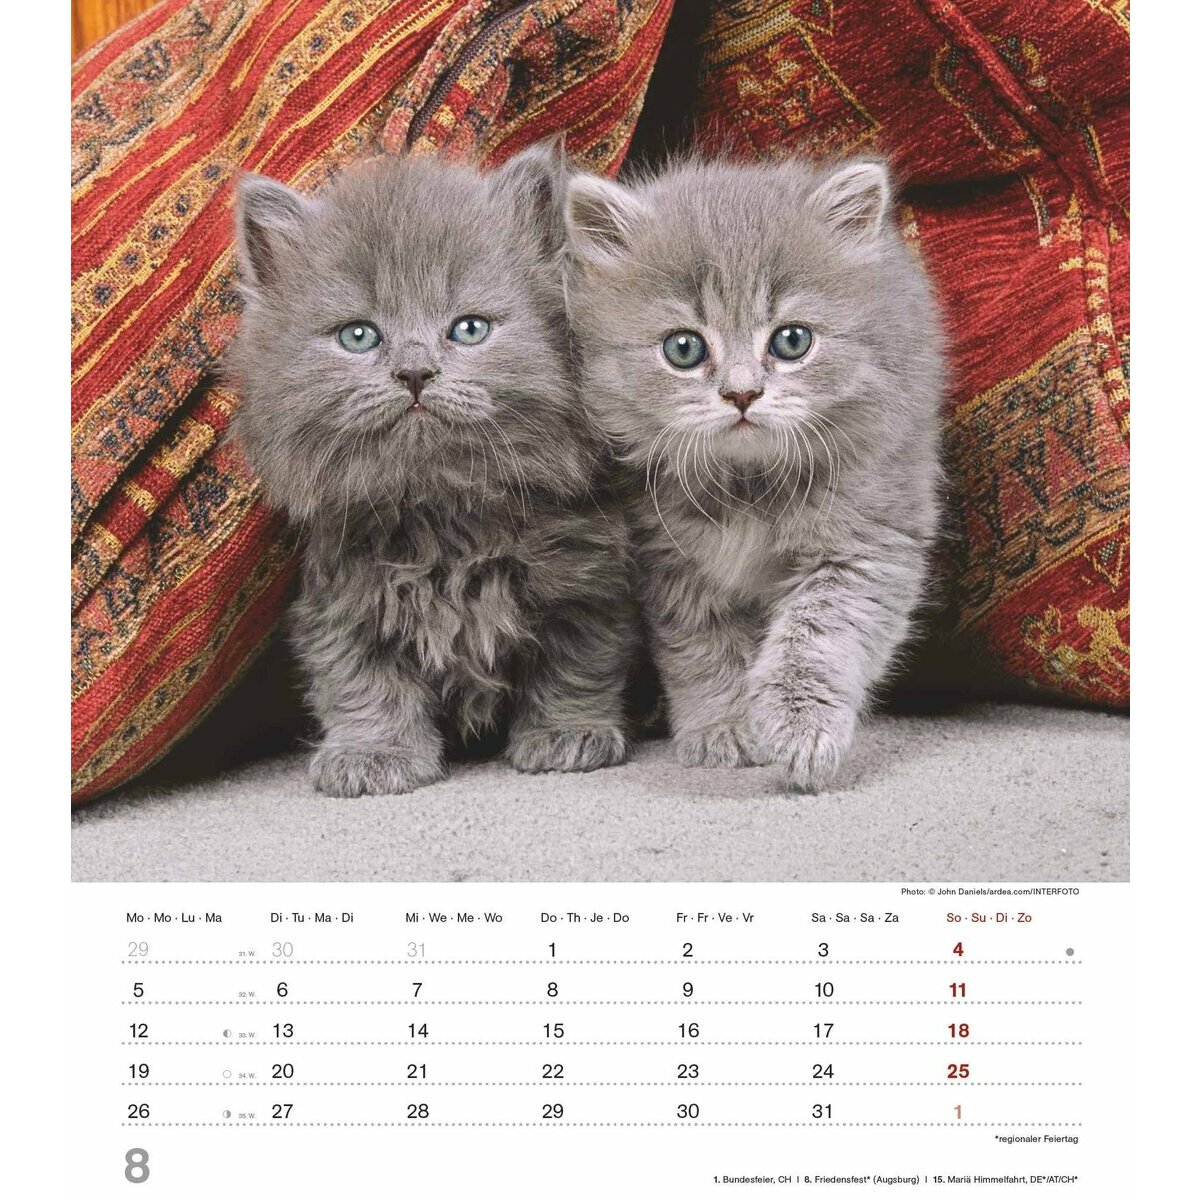 Calendrier mural 2024 Chats